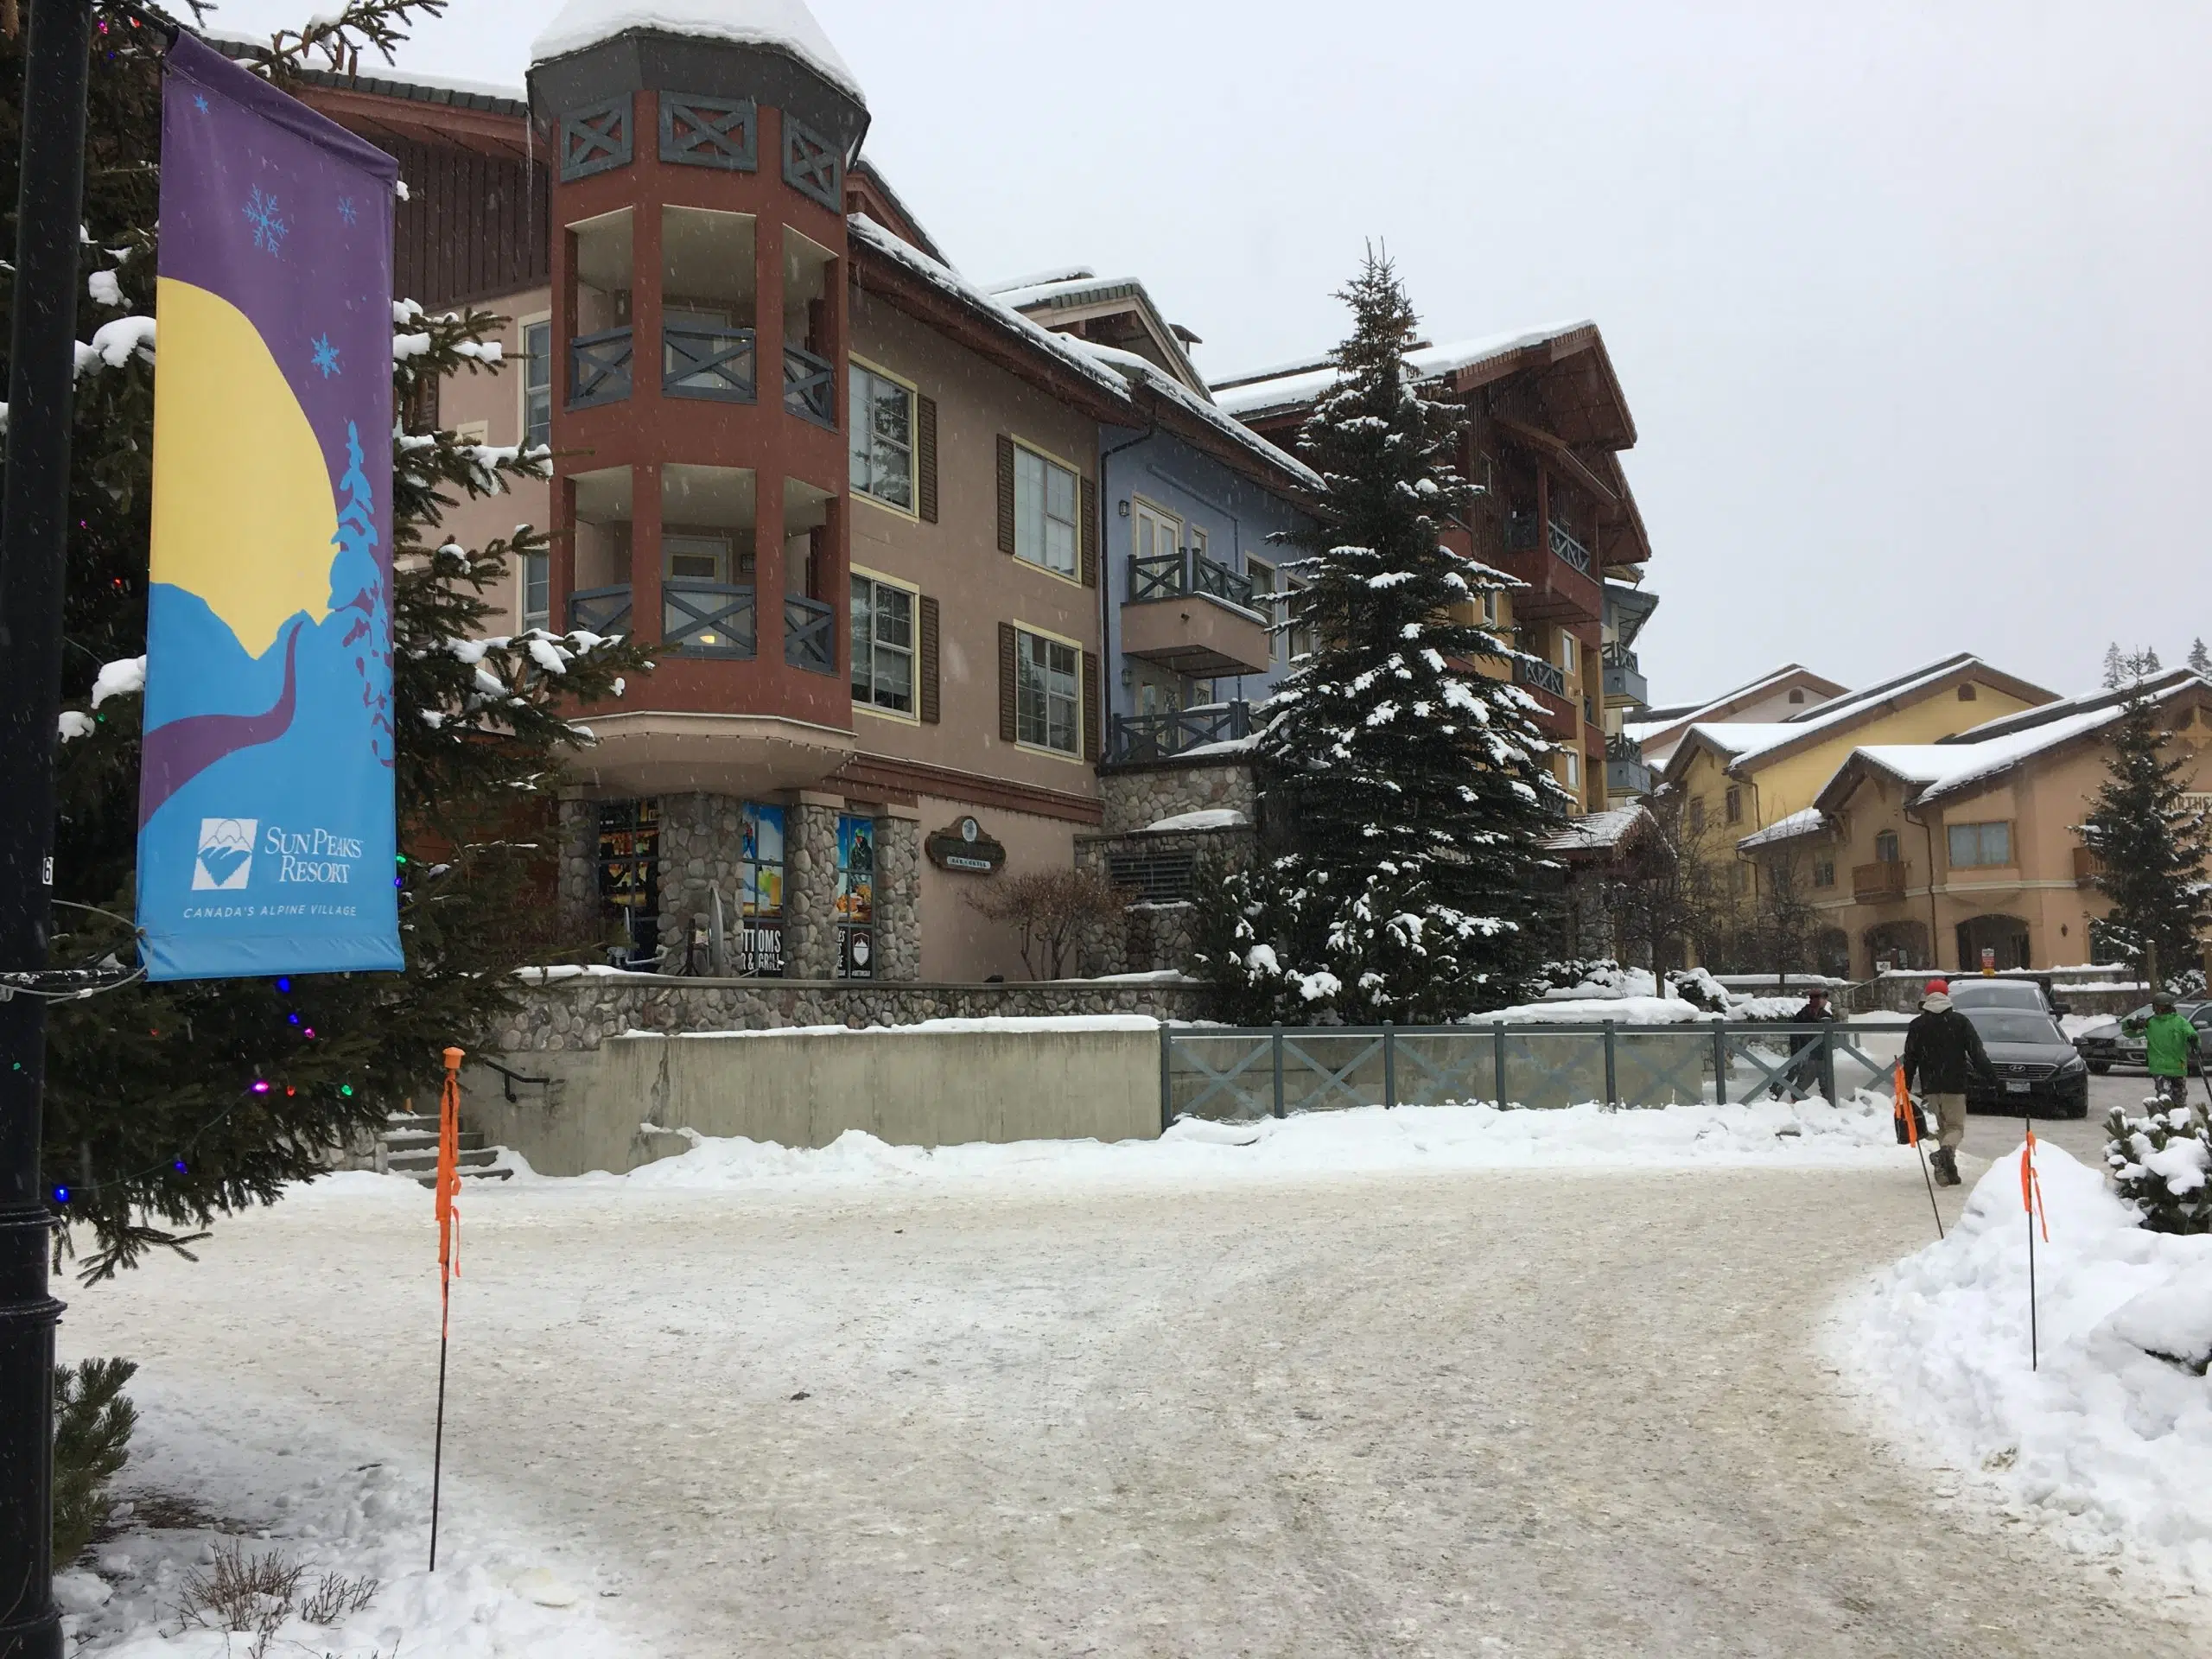 Building boom in Sun Peaks expected to have positive spinoff for area